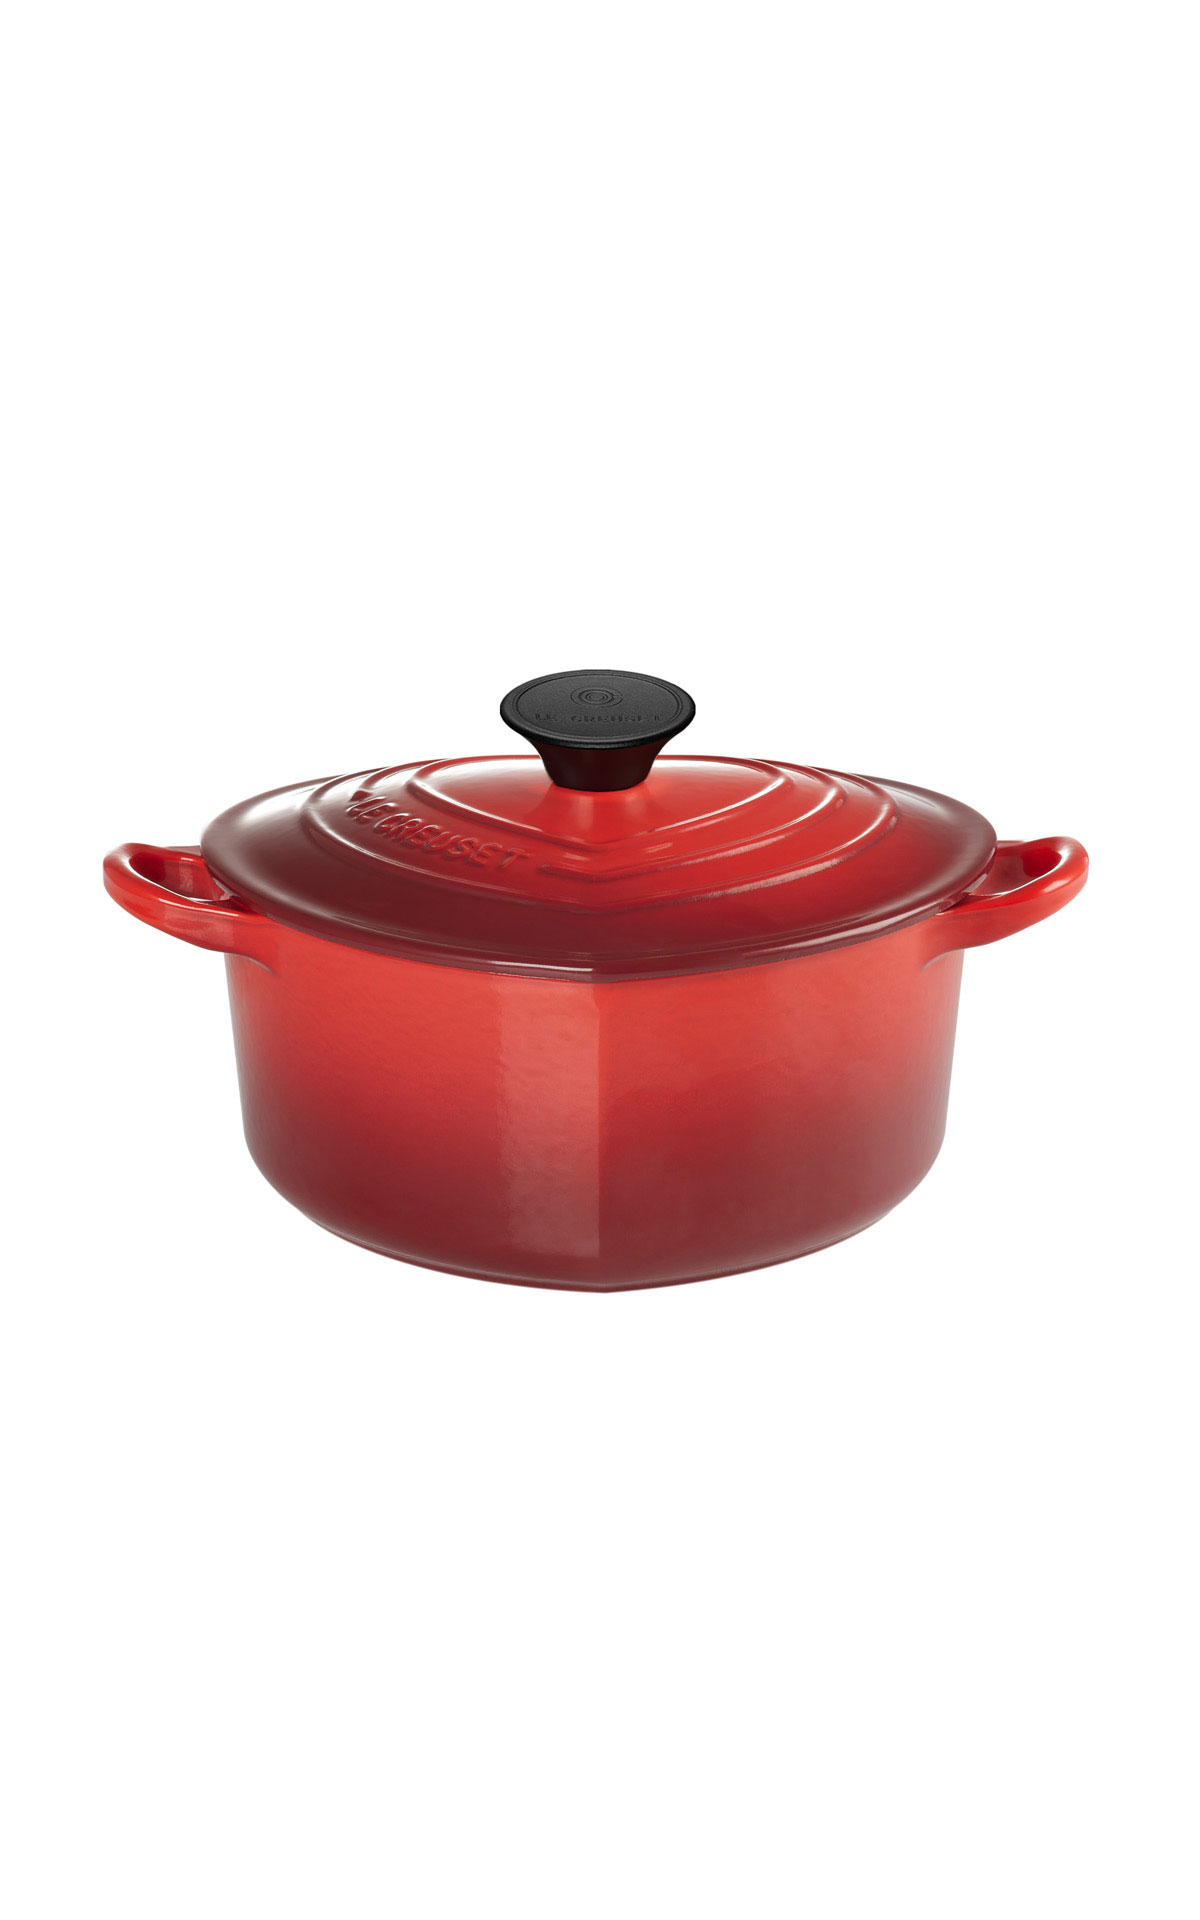 Le Creuset Cast iron heart from Bicester Village